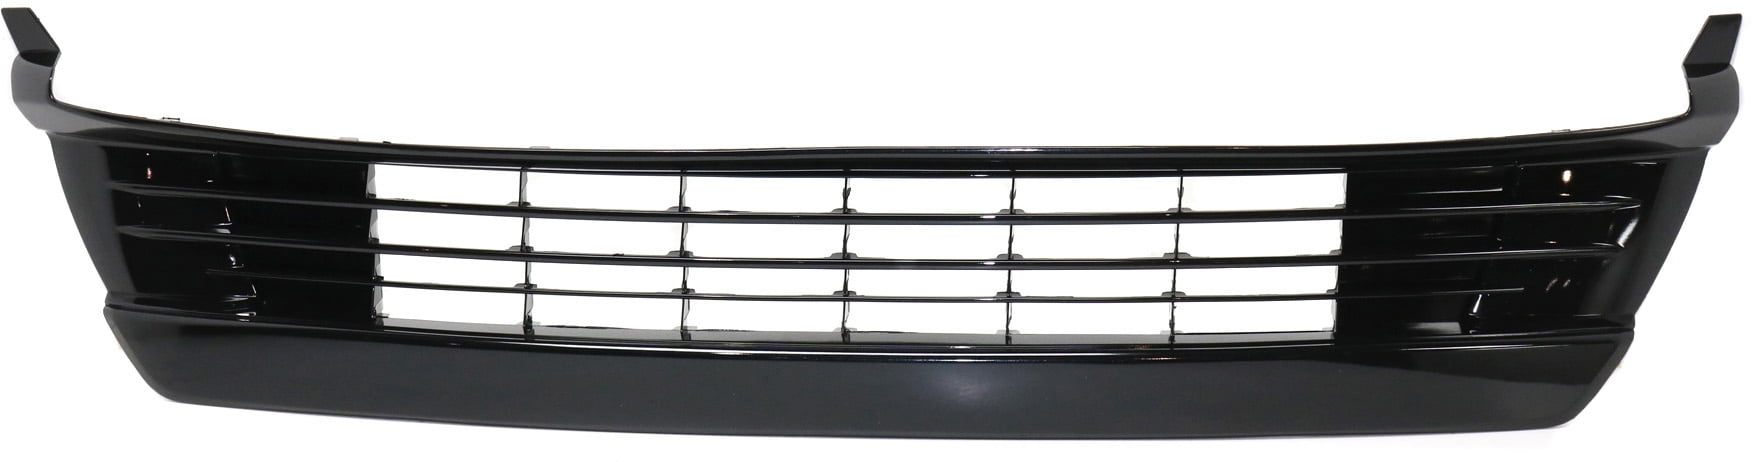 Fits 2010 2011 Toyota Prius Black Plastic Insert Front Bumper Lower Grill Grille